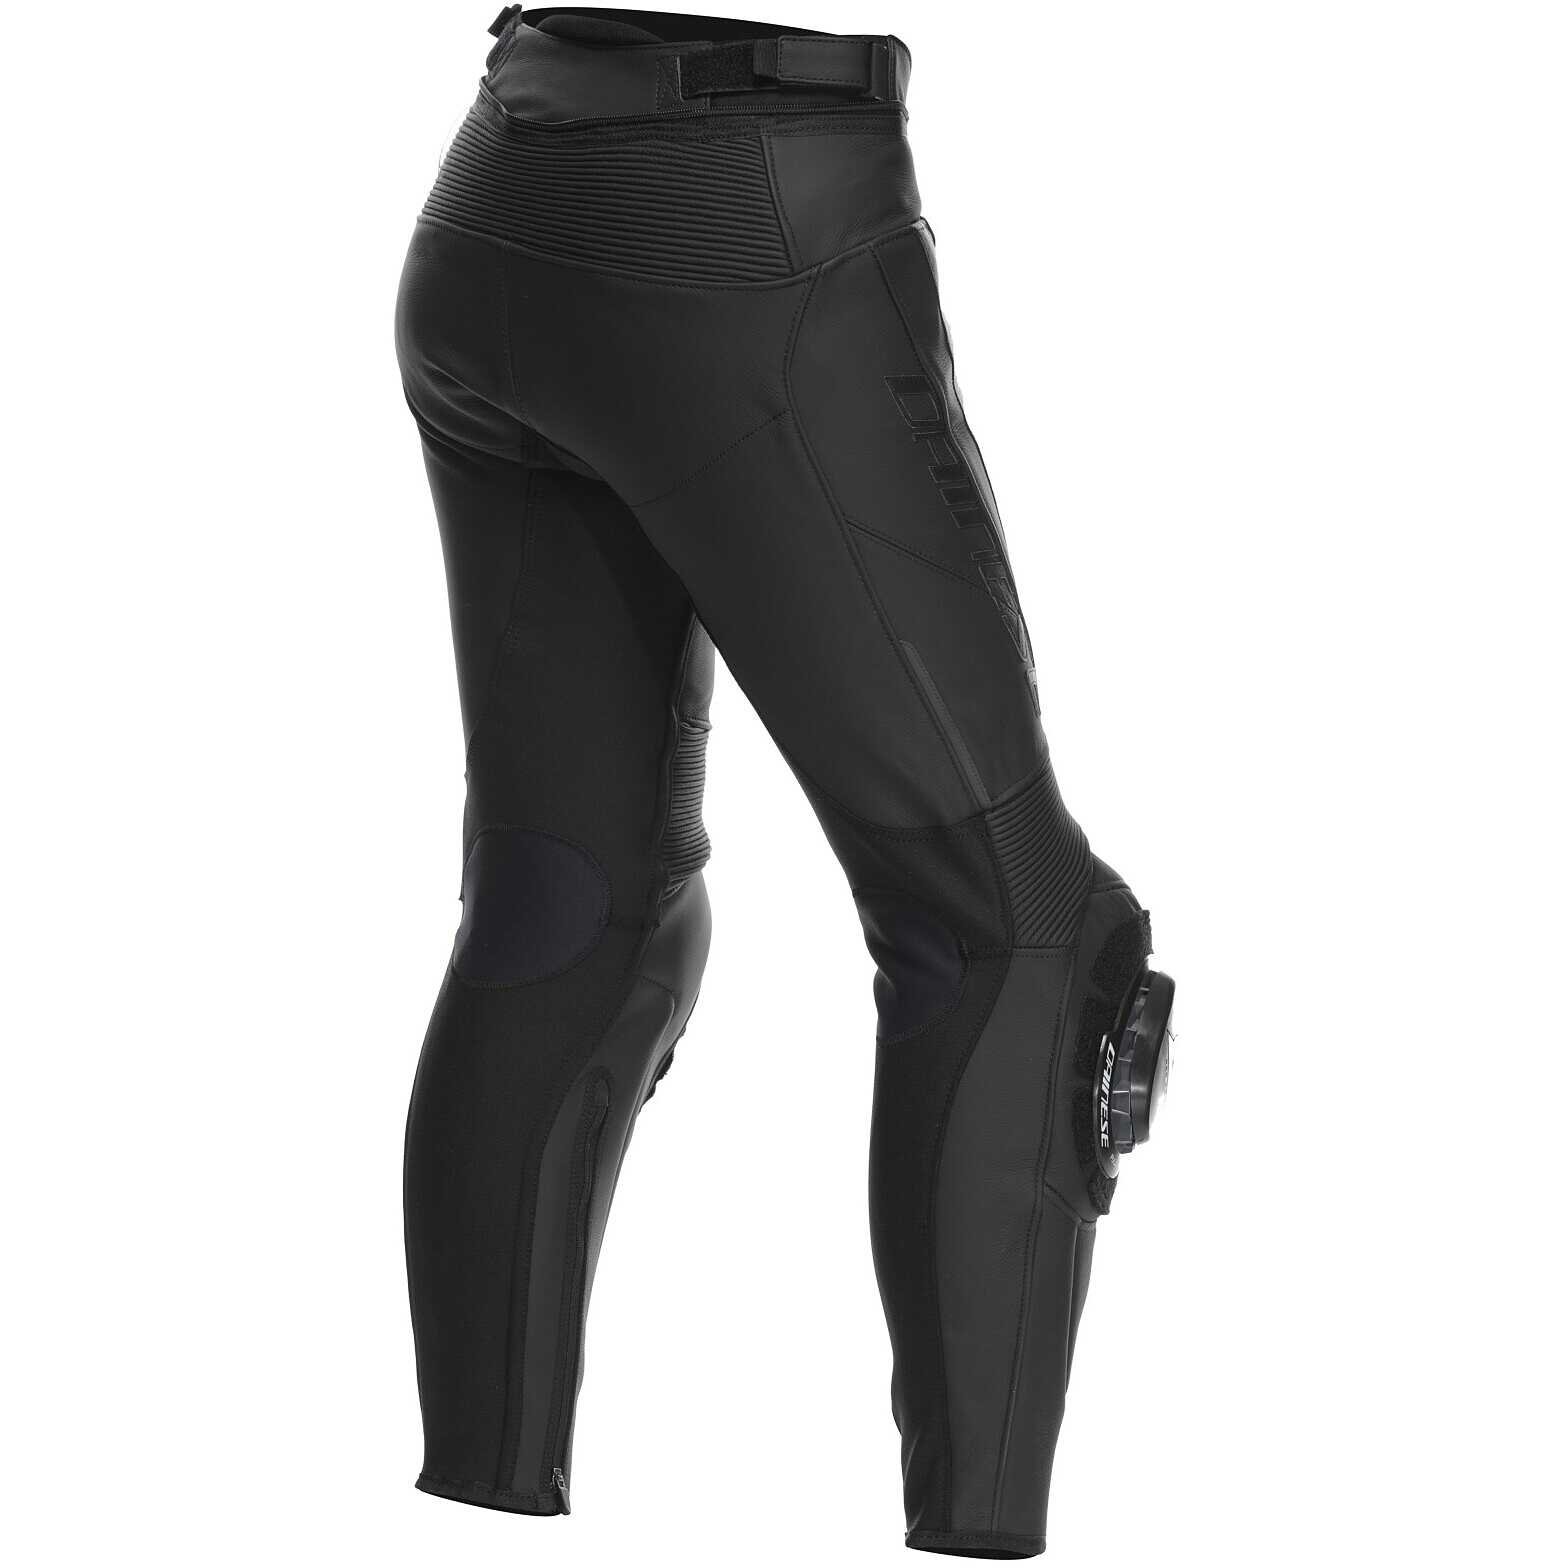 https://data.outletmoto.eu/imgprodotto/dainese-delta-4-wmn-womens-leather-motorcycle-pants-black-black_223341_zoom.jpg